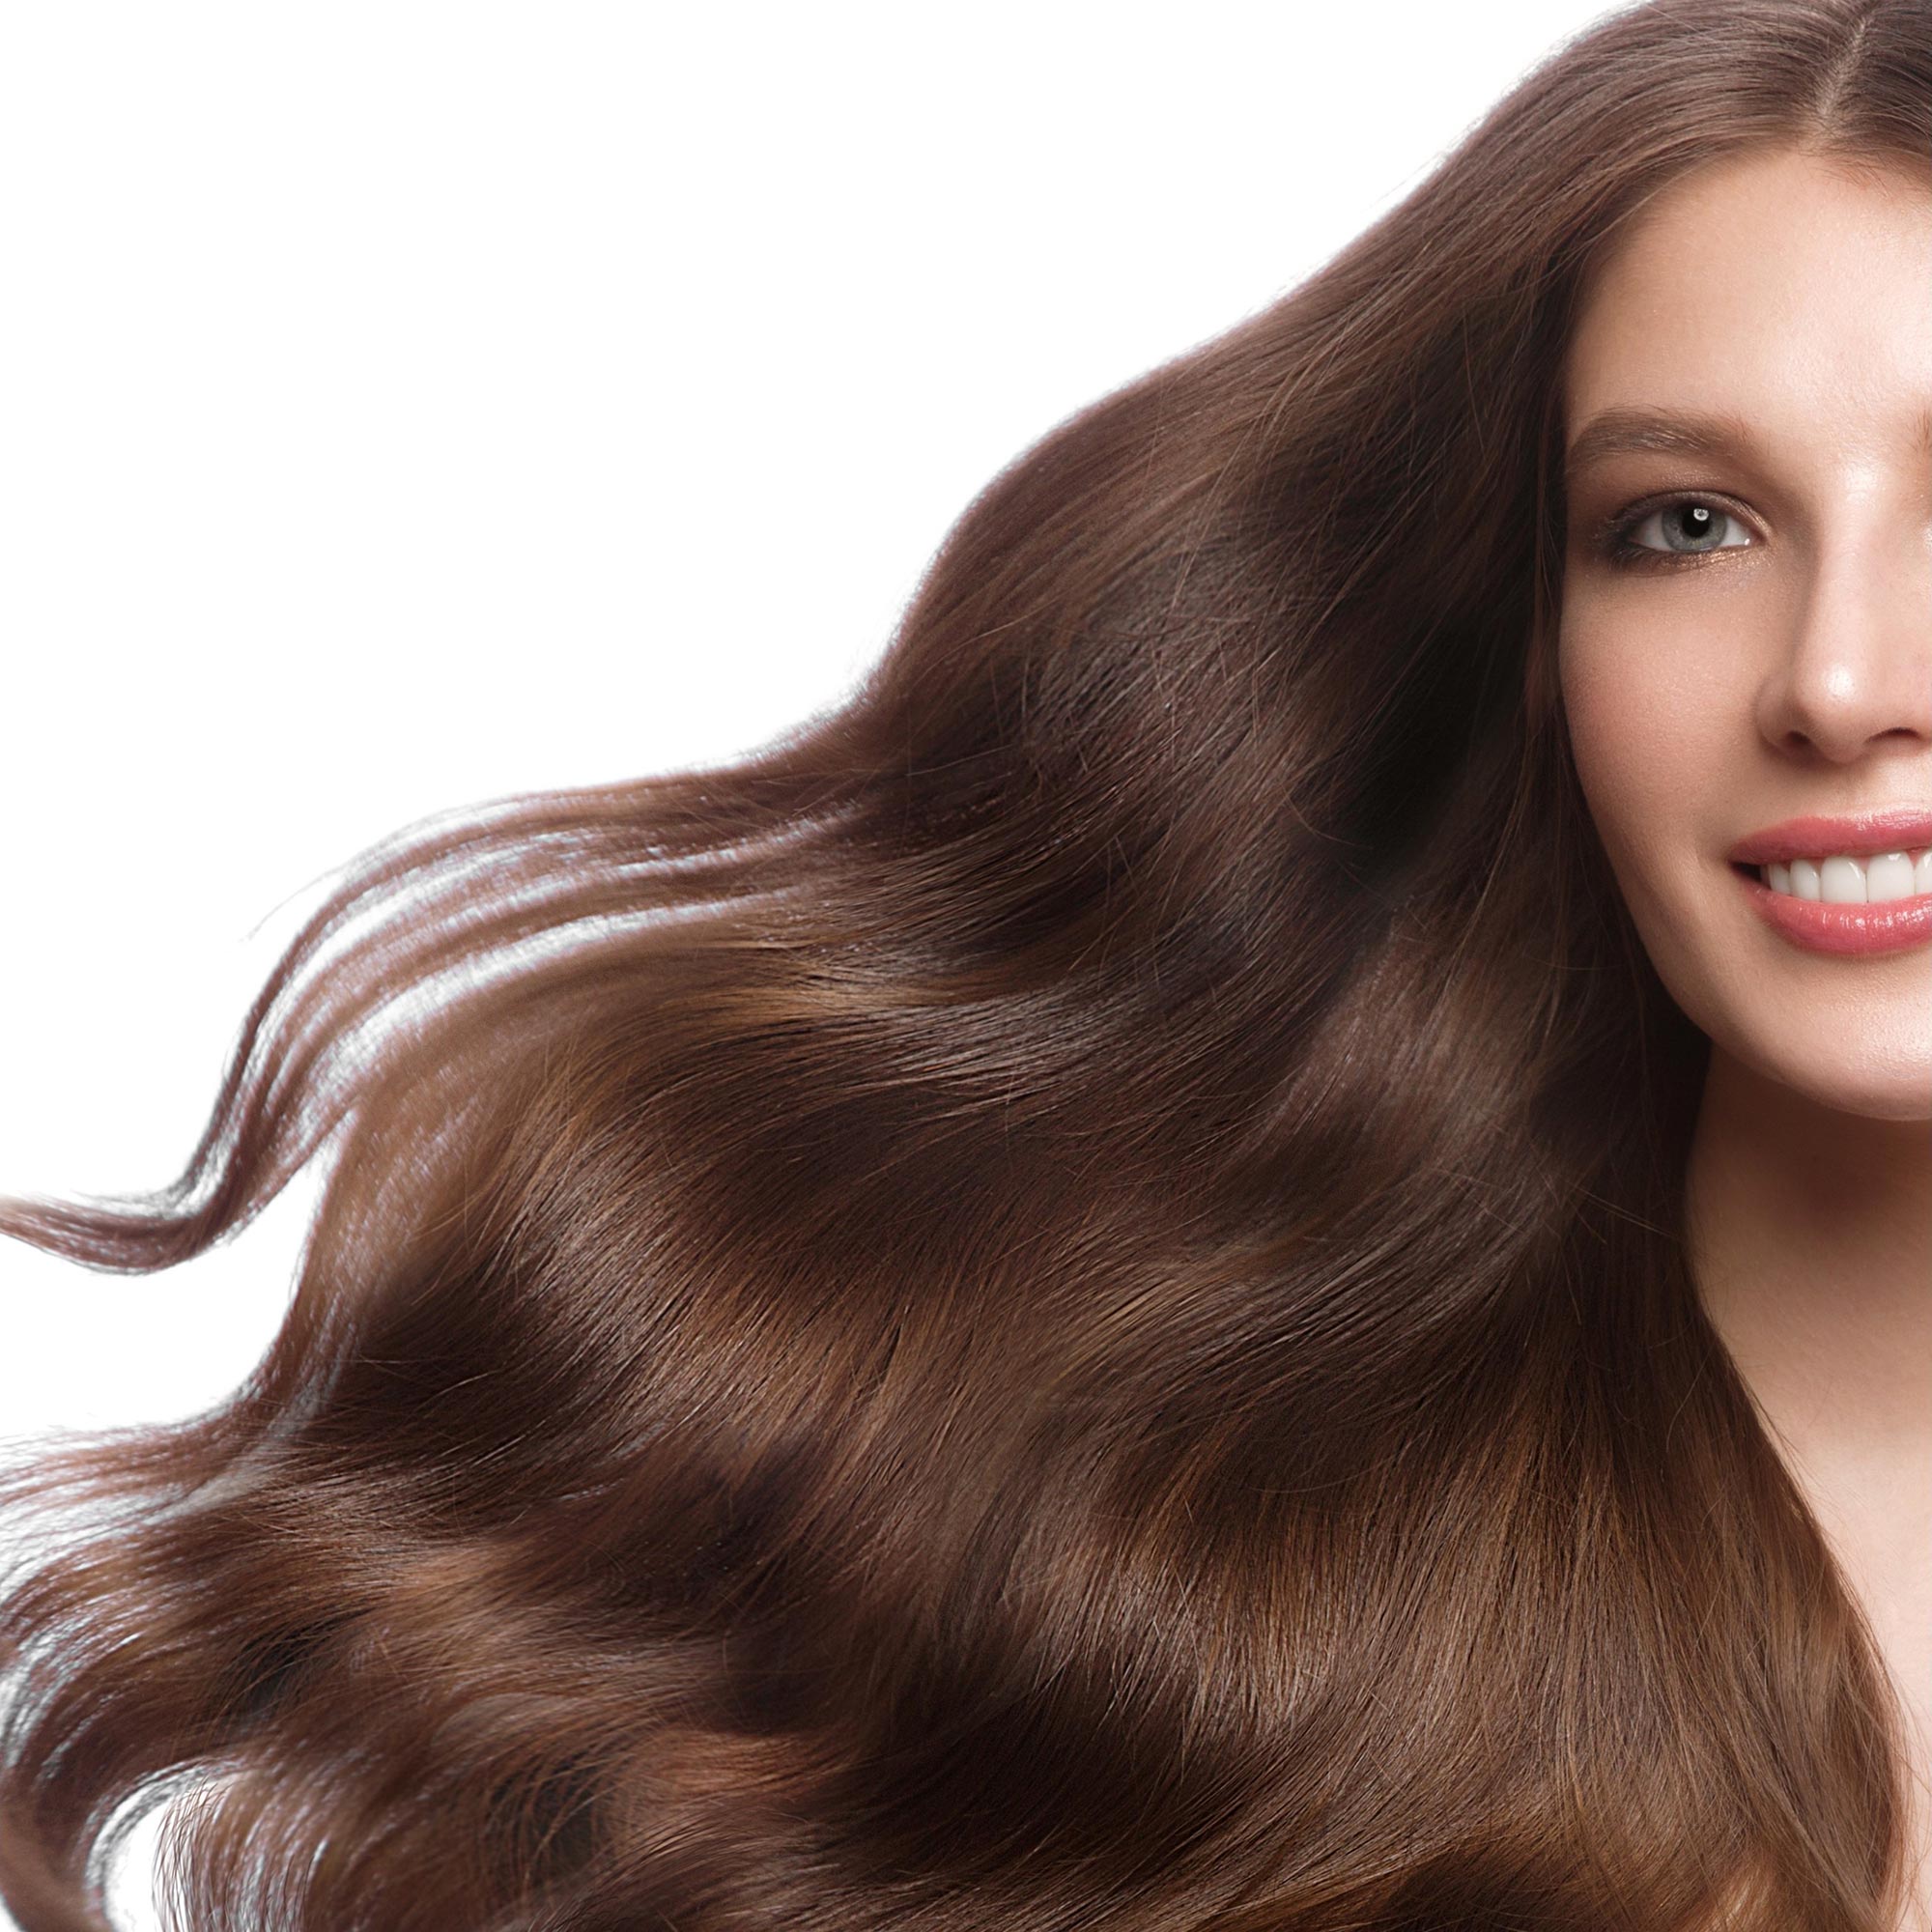 6 Vitamins to Transform Your Dry, Damaged Hair Into Perfect Glossy Locks